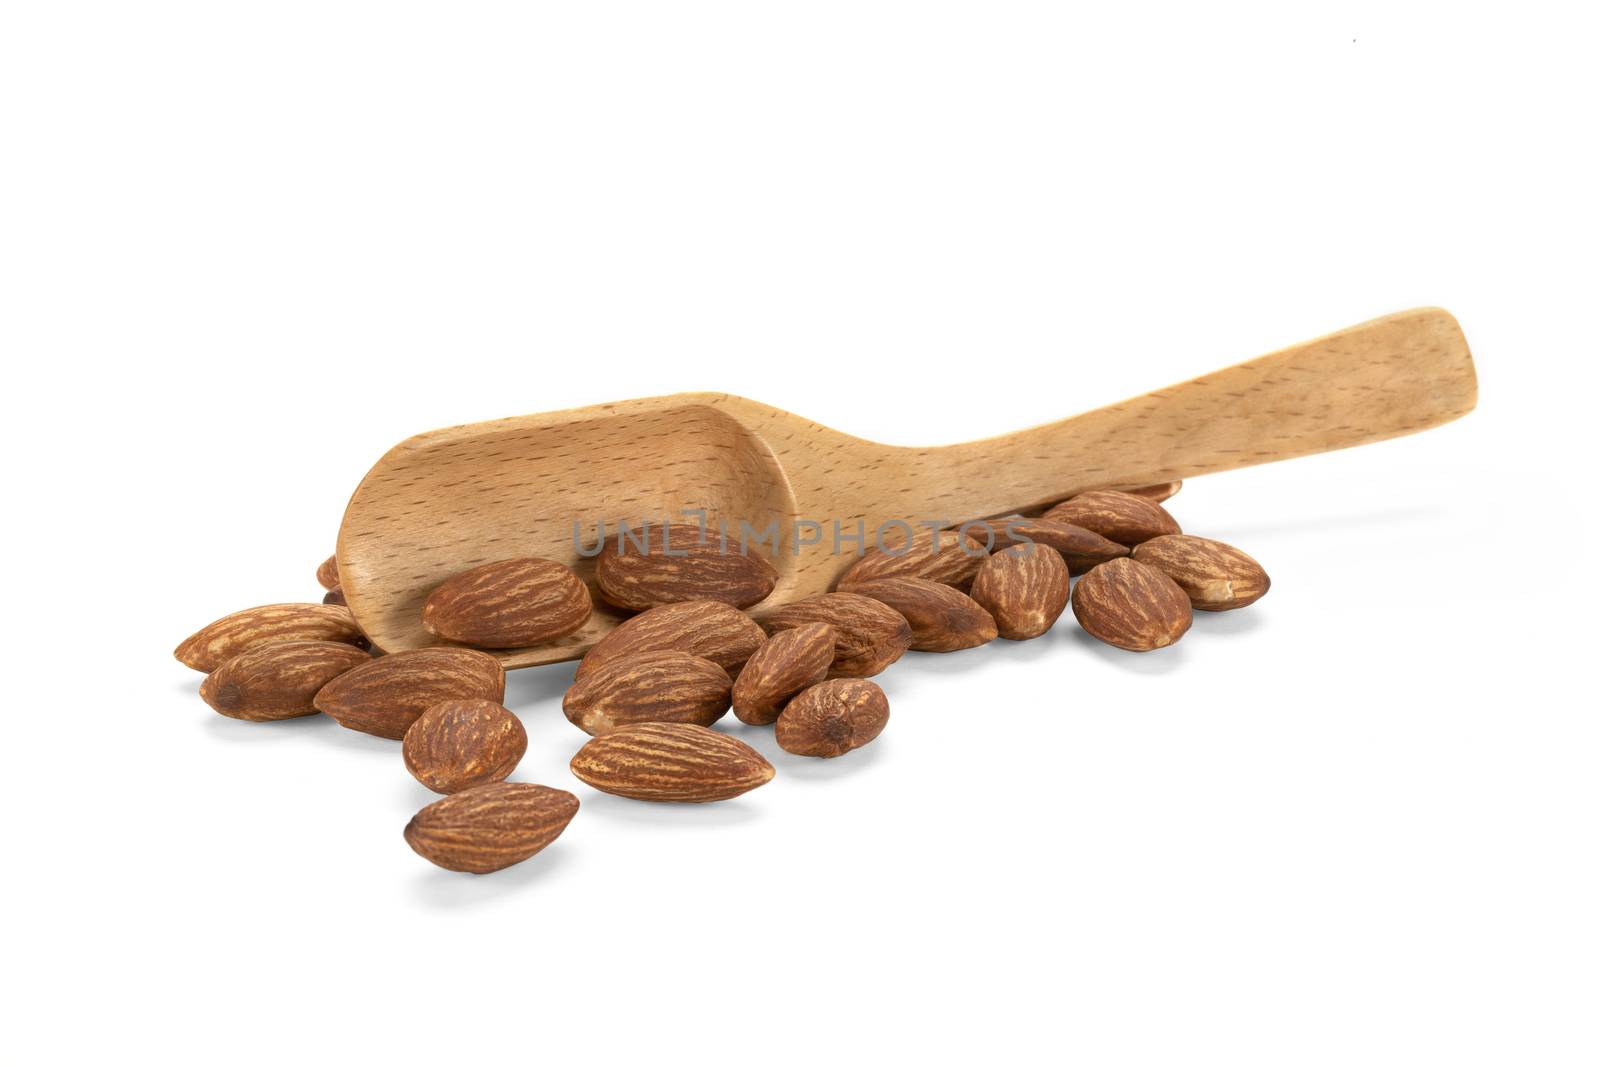 A heap of almonds and a wooden spatula on white background.